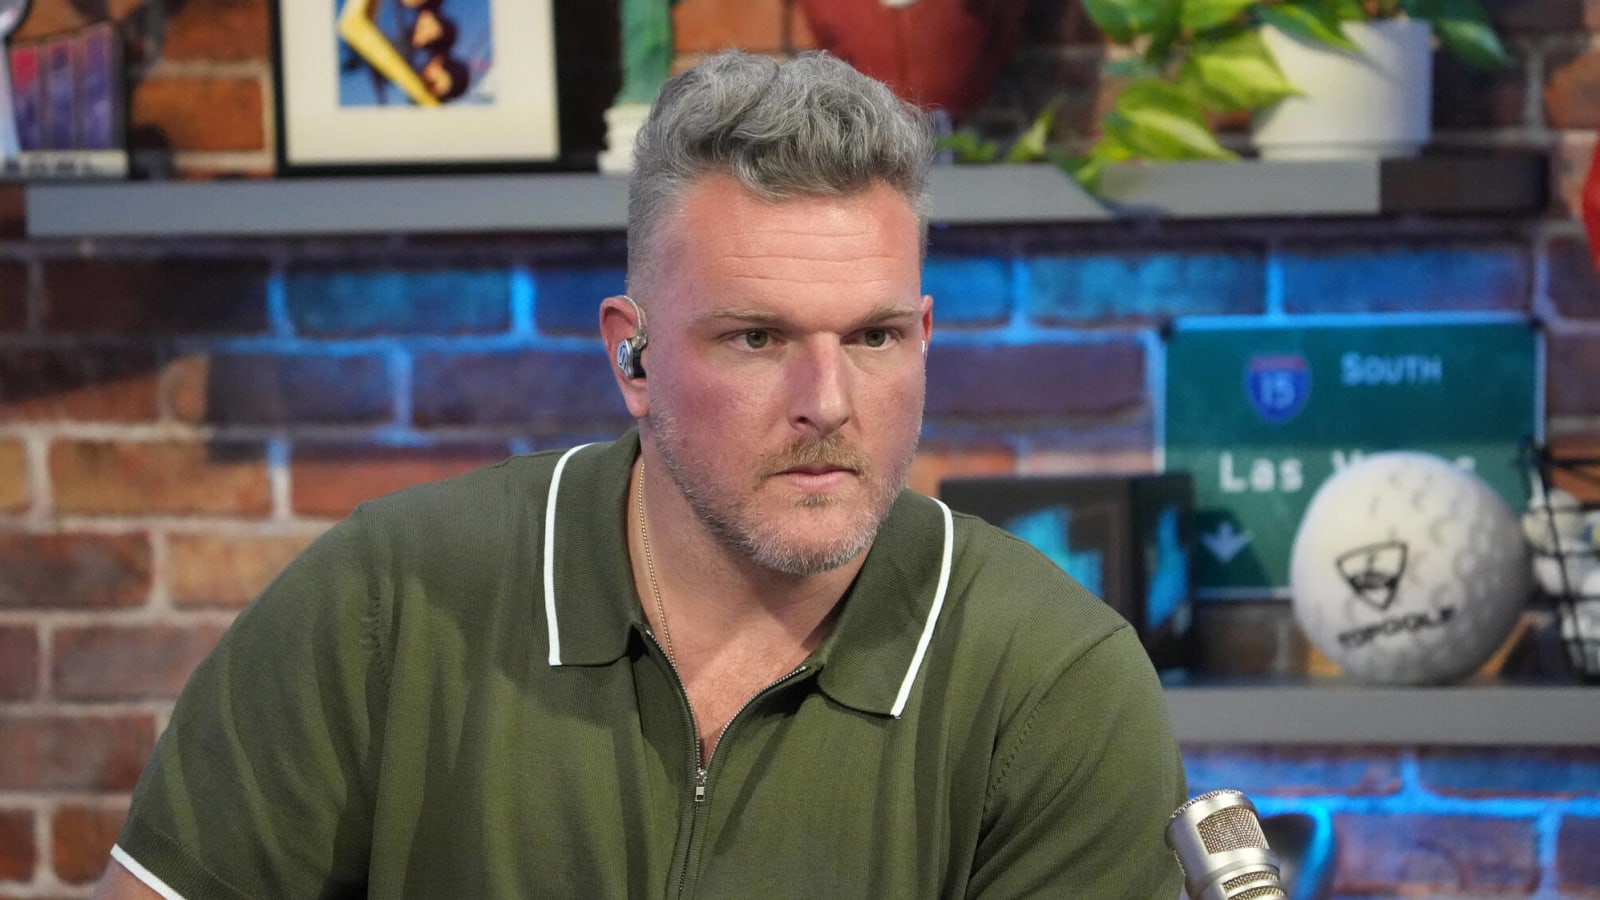 Pat McAfee lost out on an opportunity to win a Super Bowl with Tom Brady due to the NFL’s COVID regulations